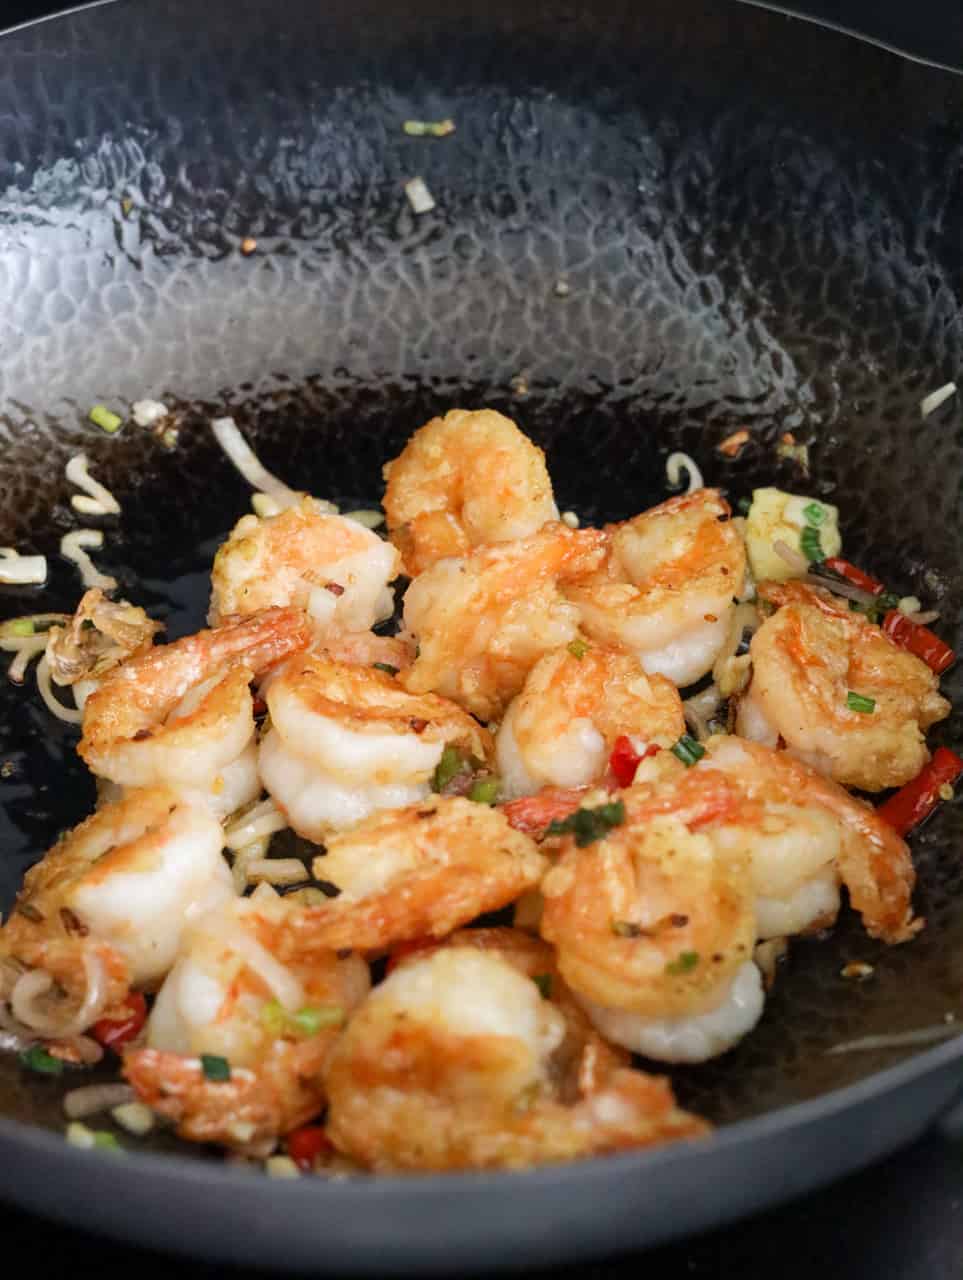 Toss in Shrimp with Seasoning